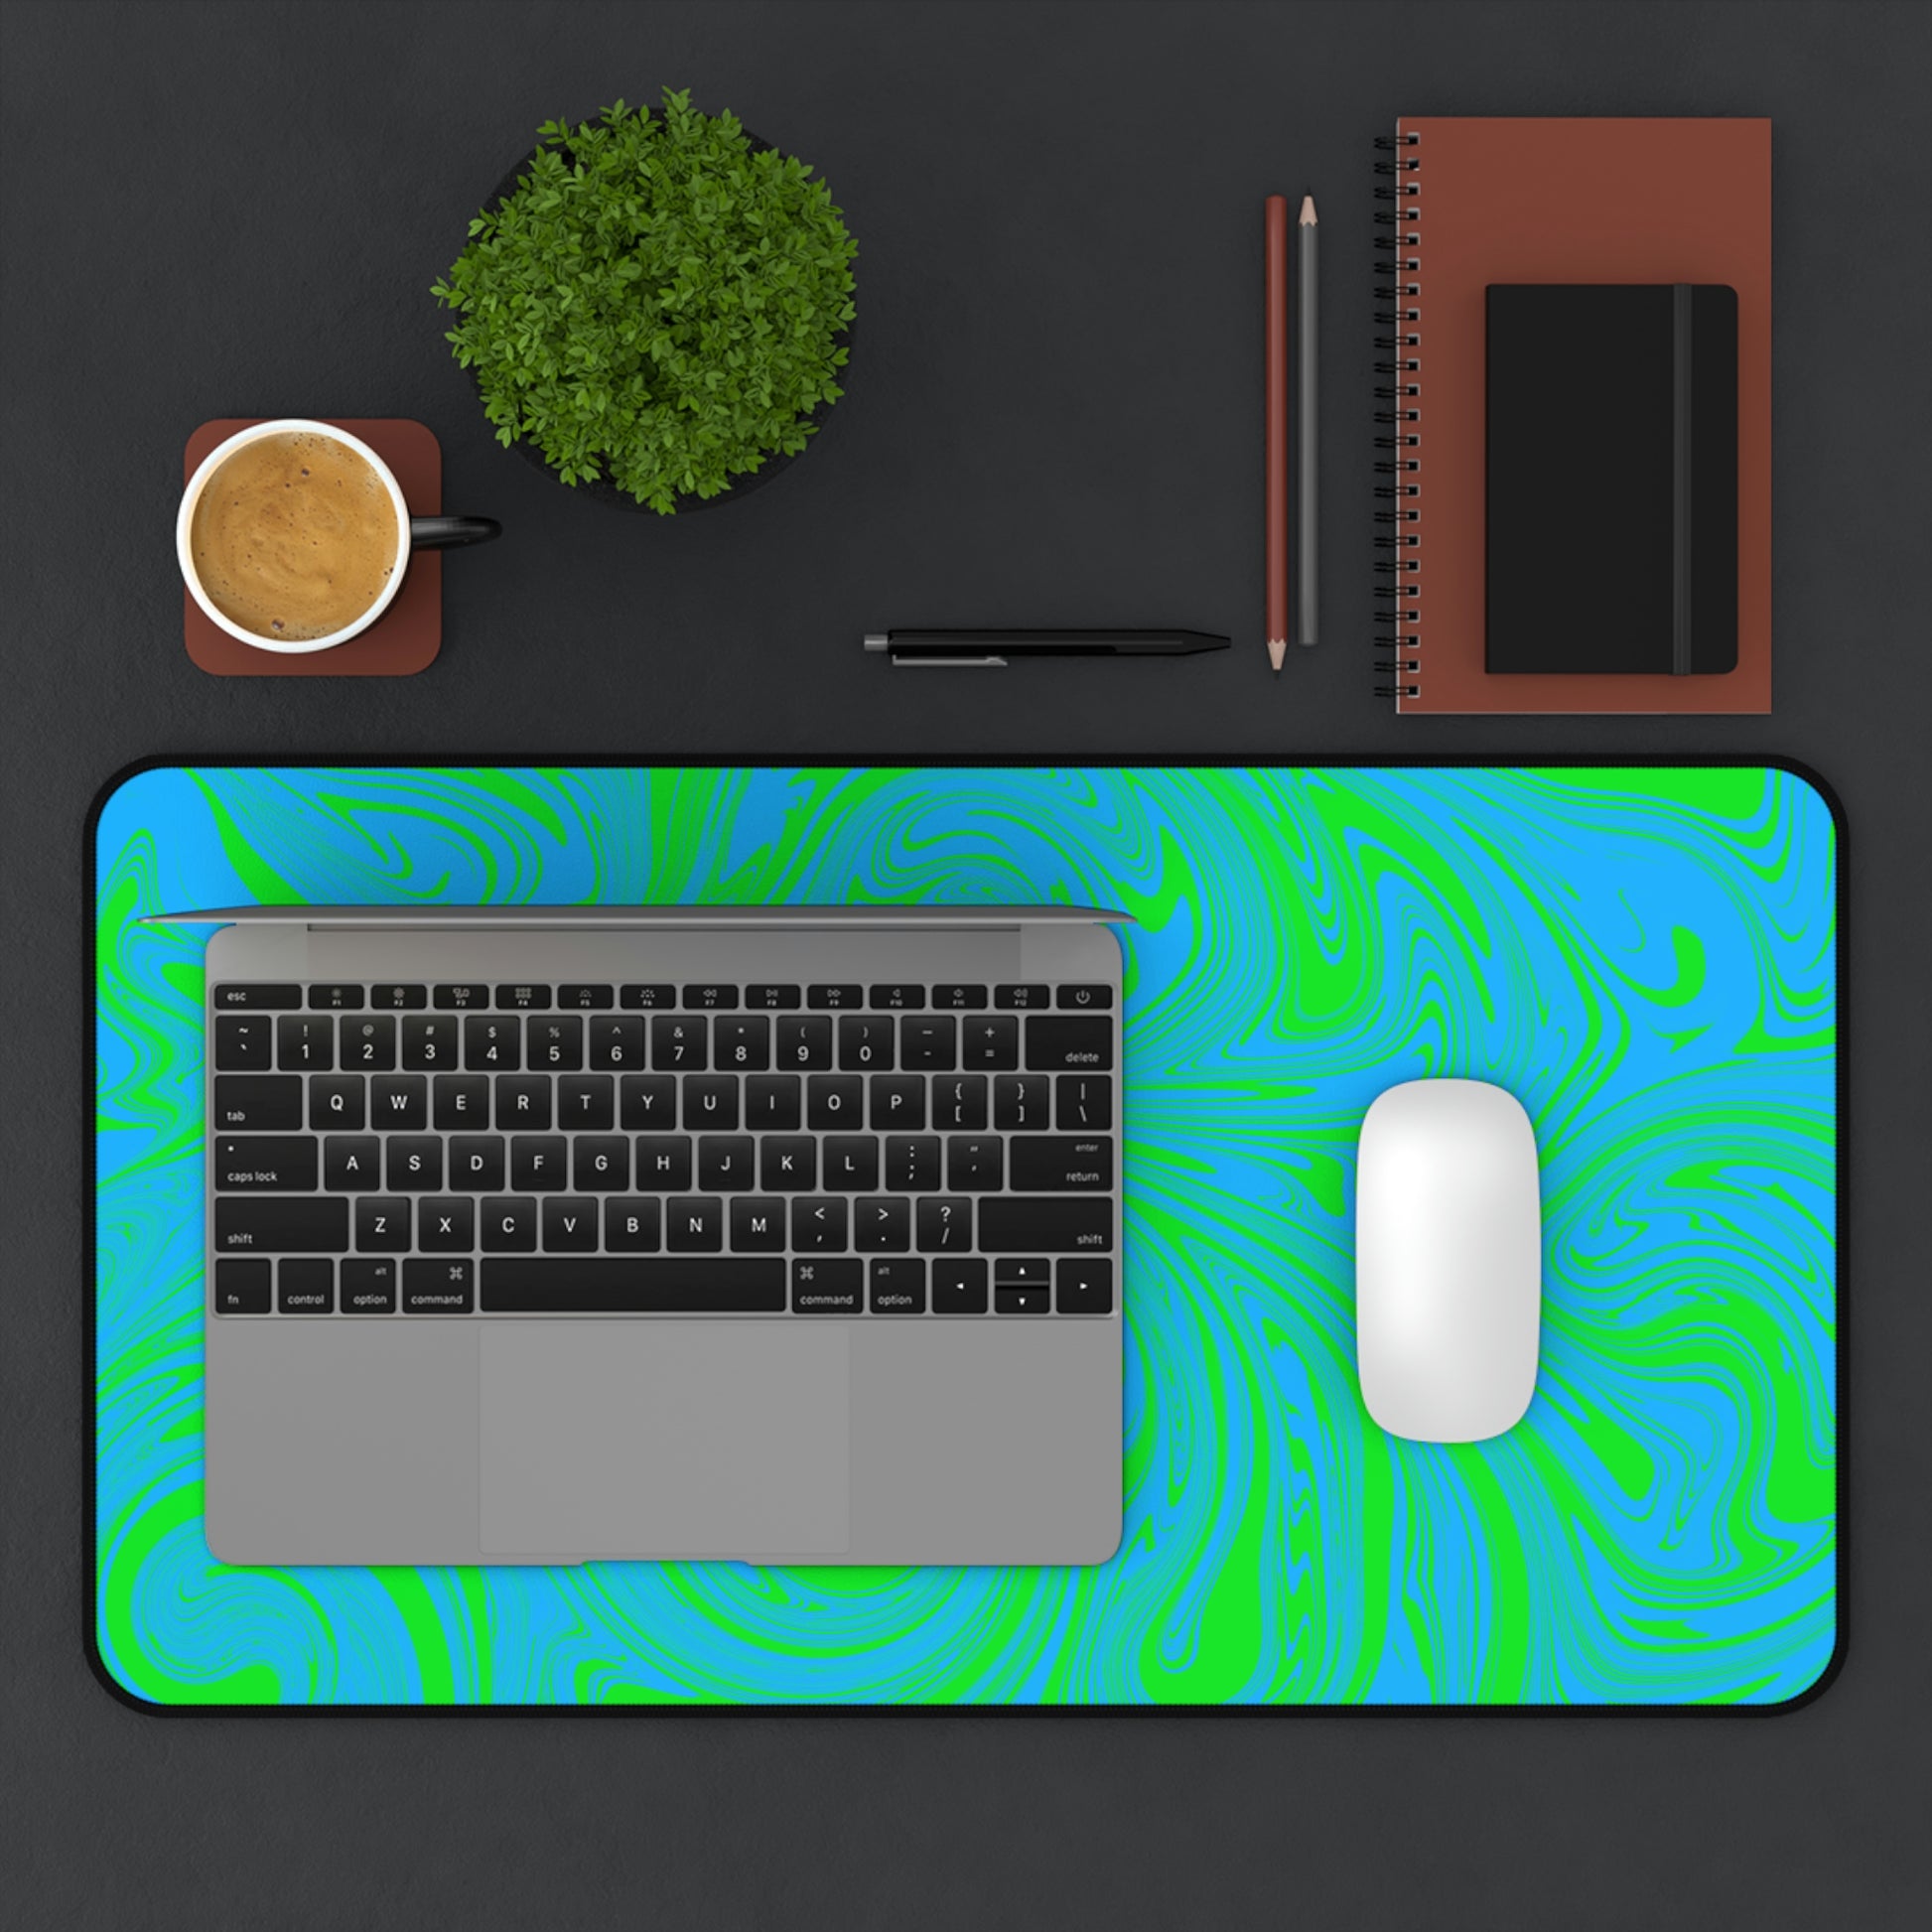 A 12" x 22" desk mat with blue and green swirls. A laptop and mouse sit on top of it.